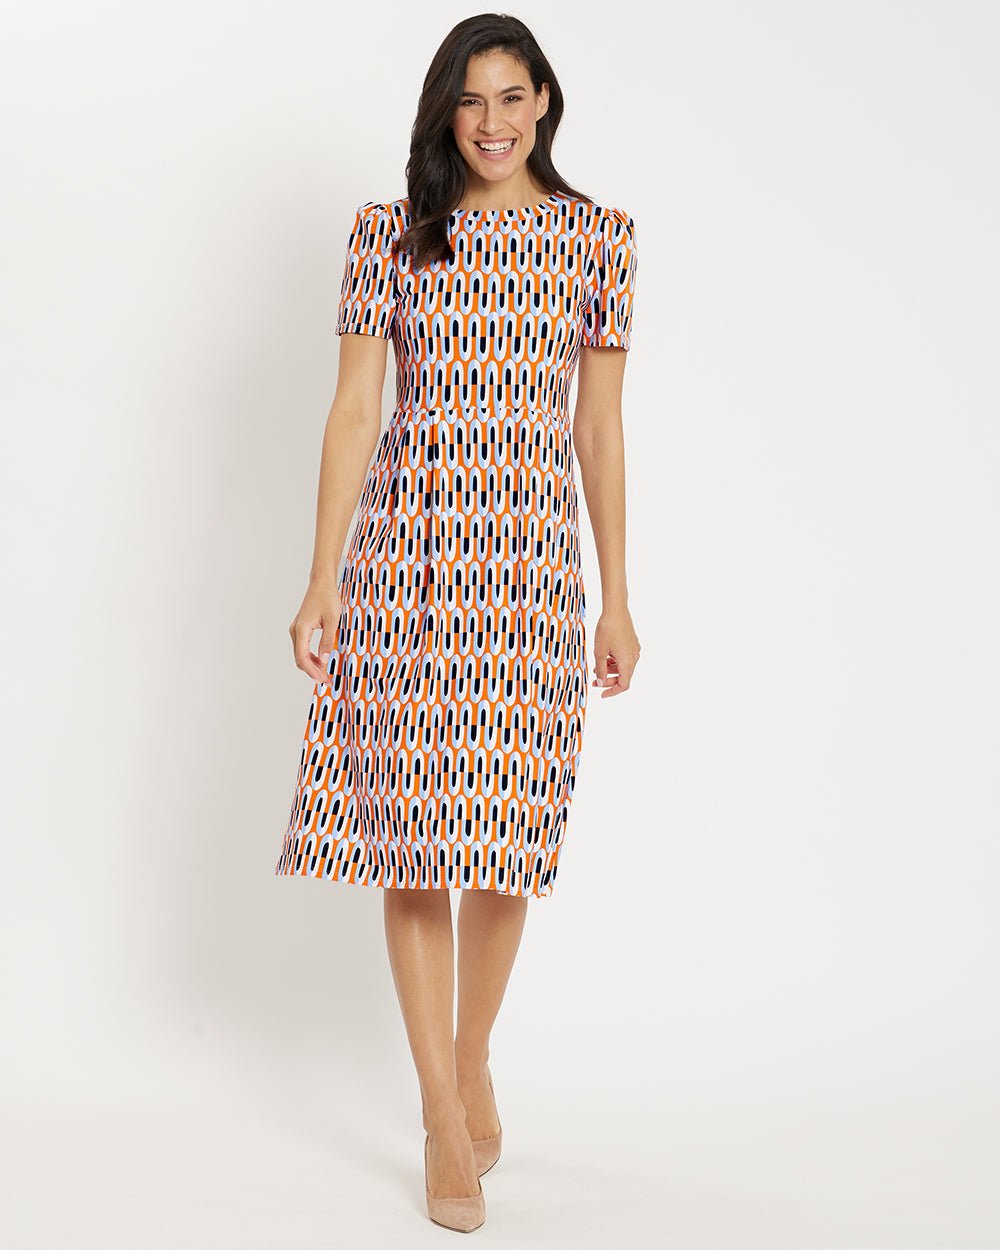 Jude Connally - Stacey Mod Arch Dress: Clementine - Shorely Chic Boutique